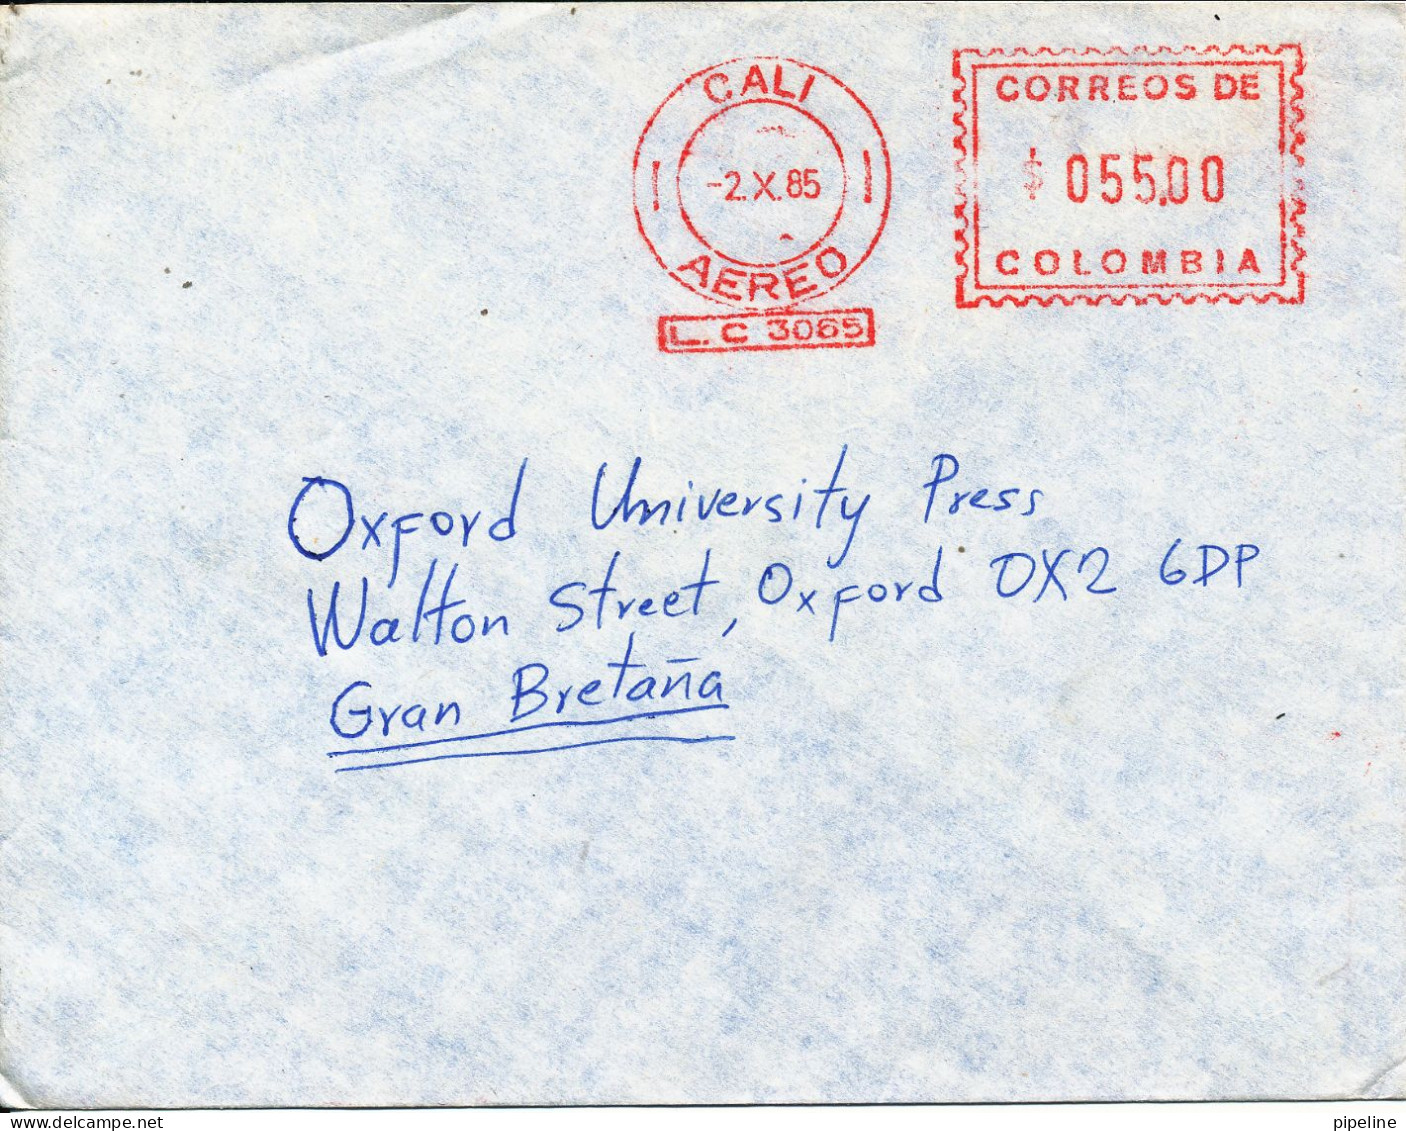 Colombia Air Mail Cover Sent Express To England With Meter Cancel CALI 2-10-1985 - Colombia